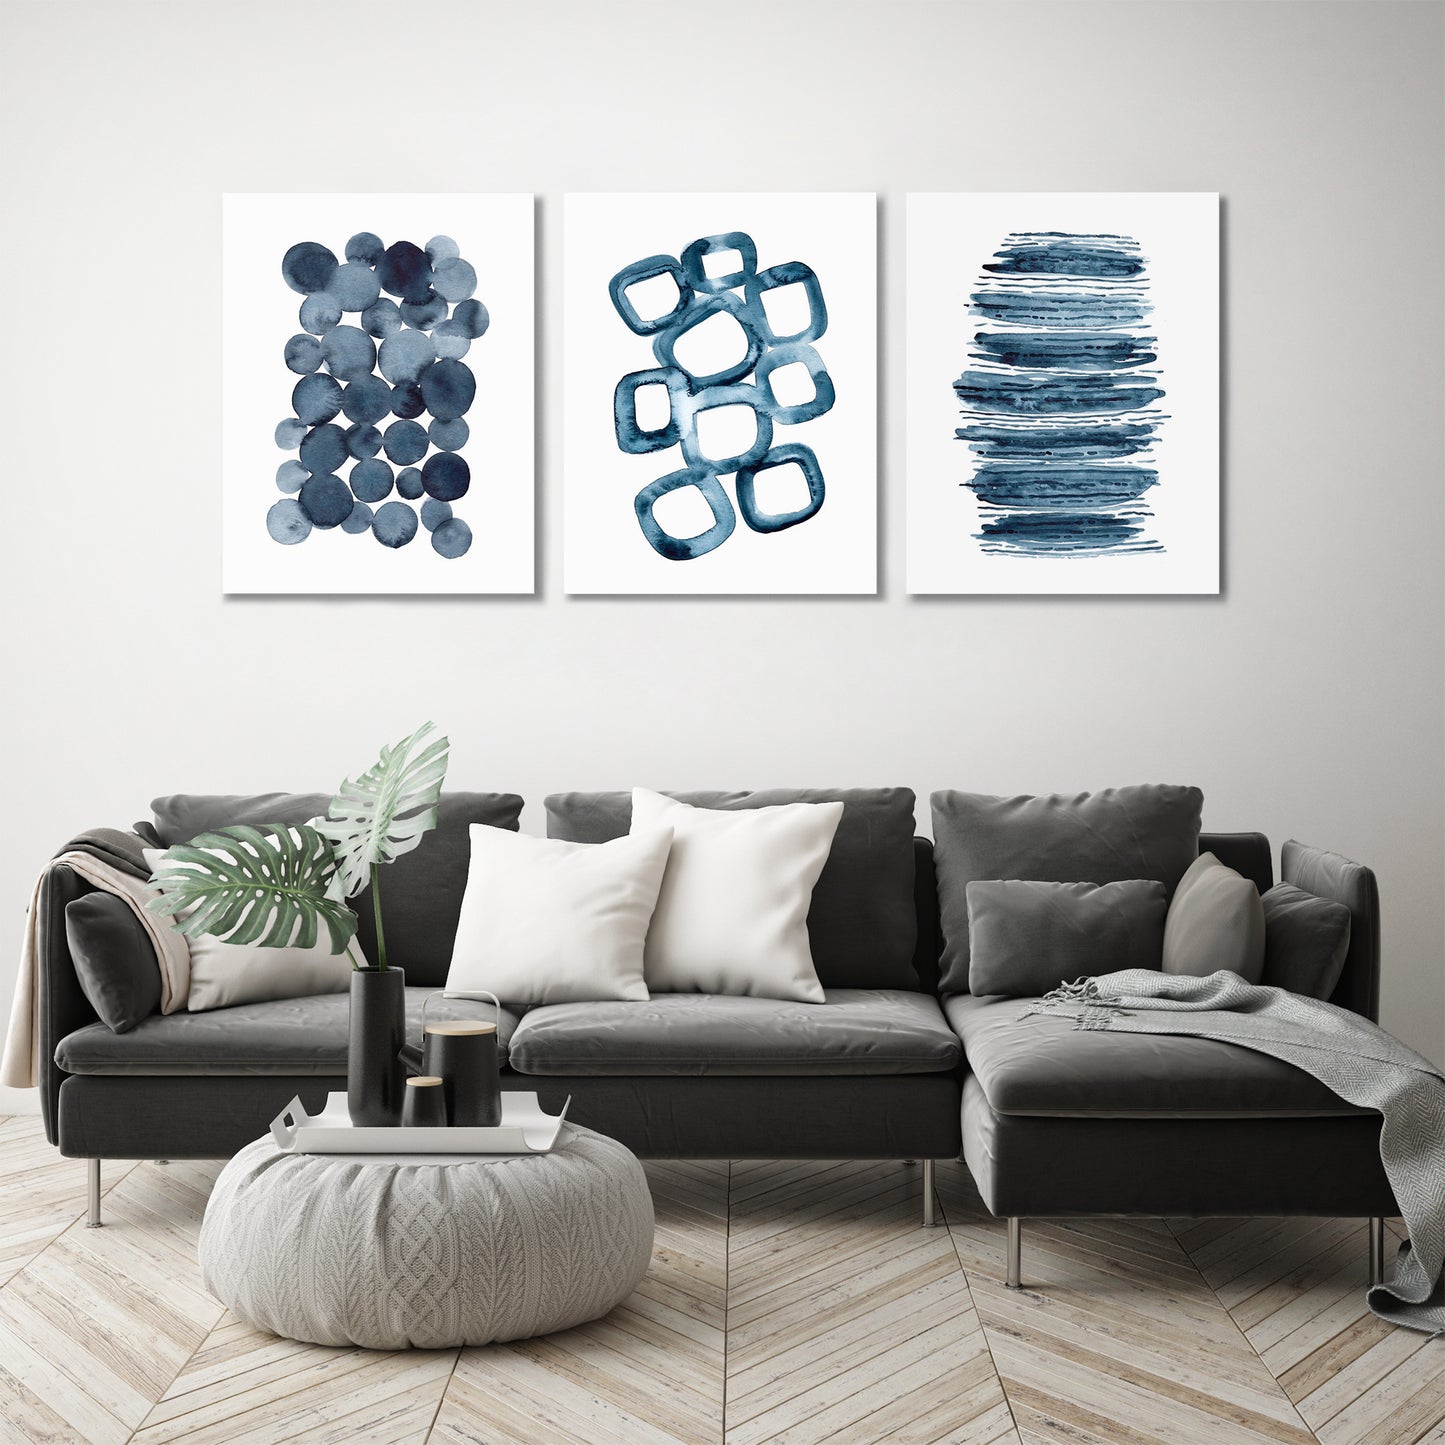 Watercolor Shapes by Lisa Nohren - 3 Piece Canvas Triptych - Americanflat